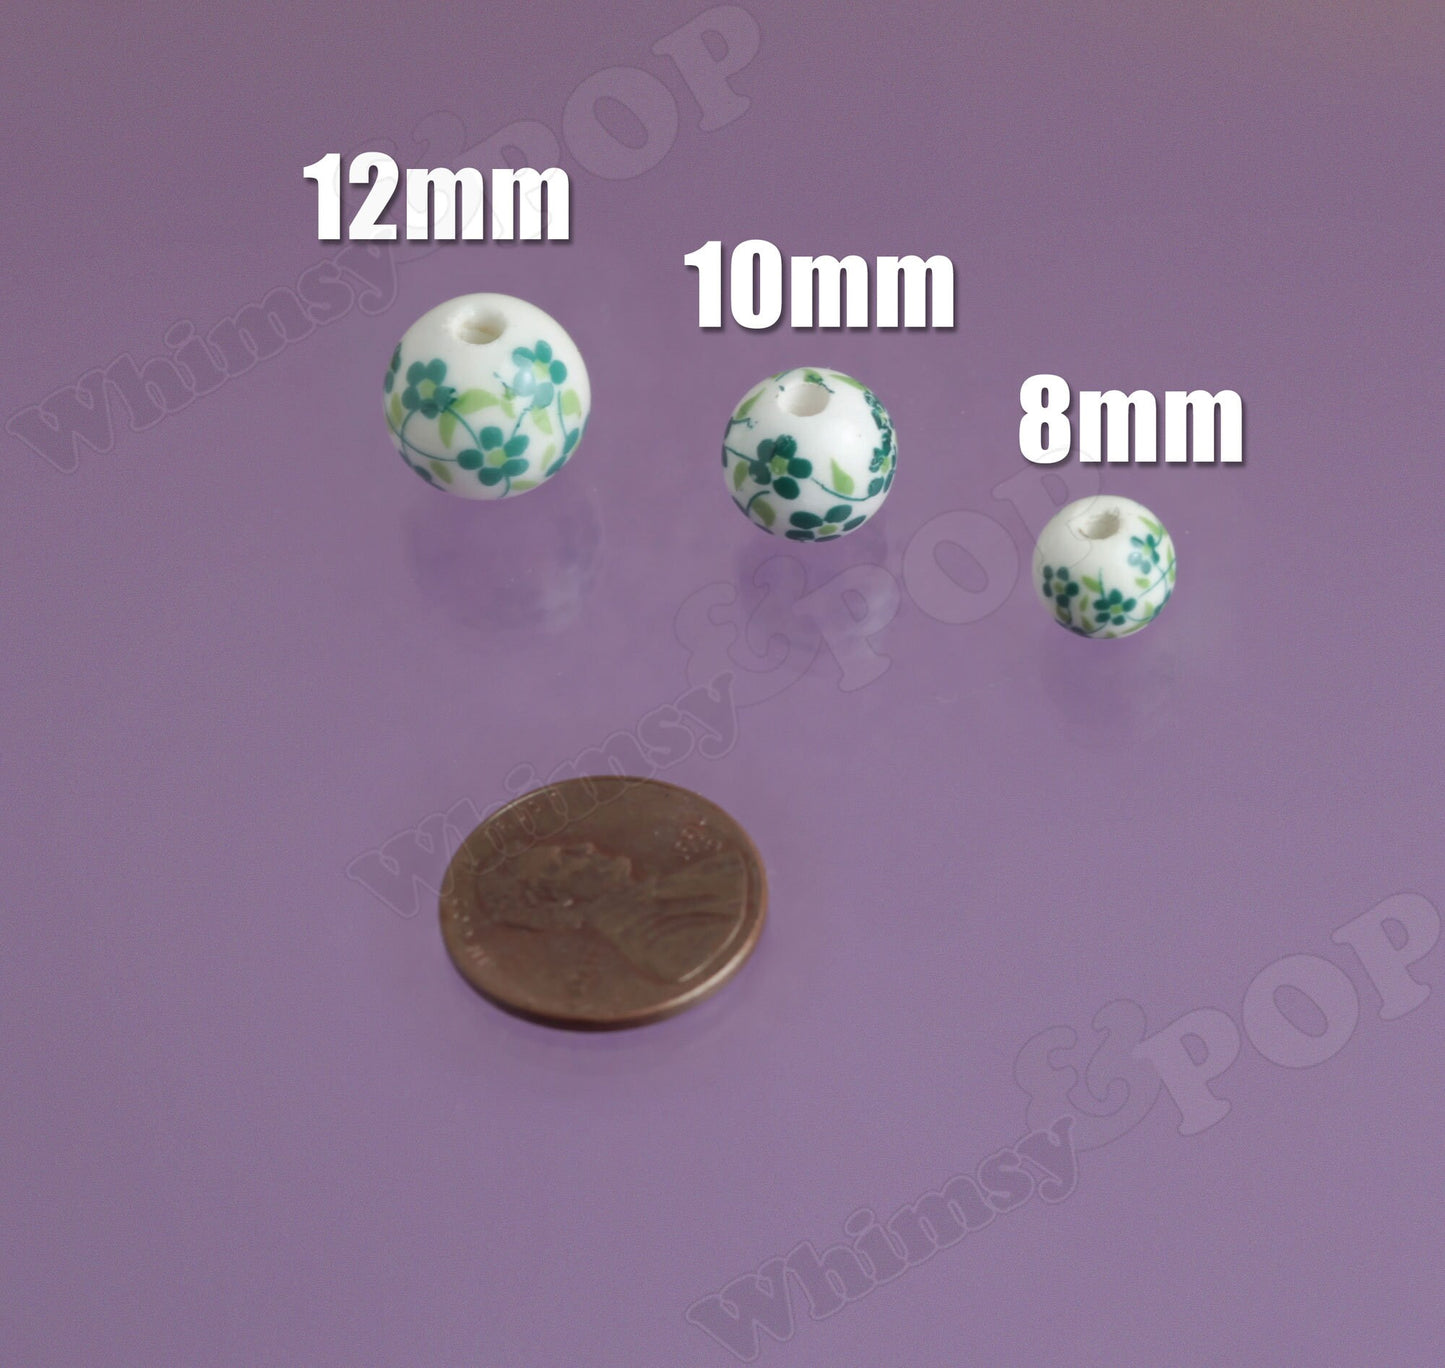 Green Floral Porcelain Round Beads, 8mm Beads, 10mm Beads, 12mm Beads, Porcelain Beads, Flower Patterned Beads, 12mm, 3mm Hole (R8-073)